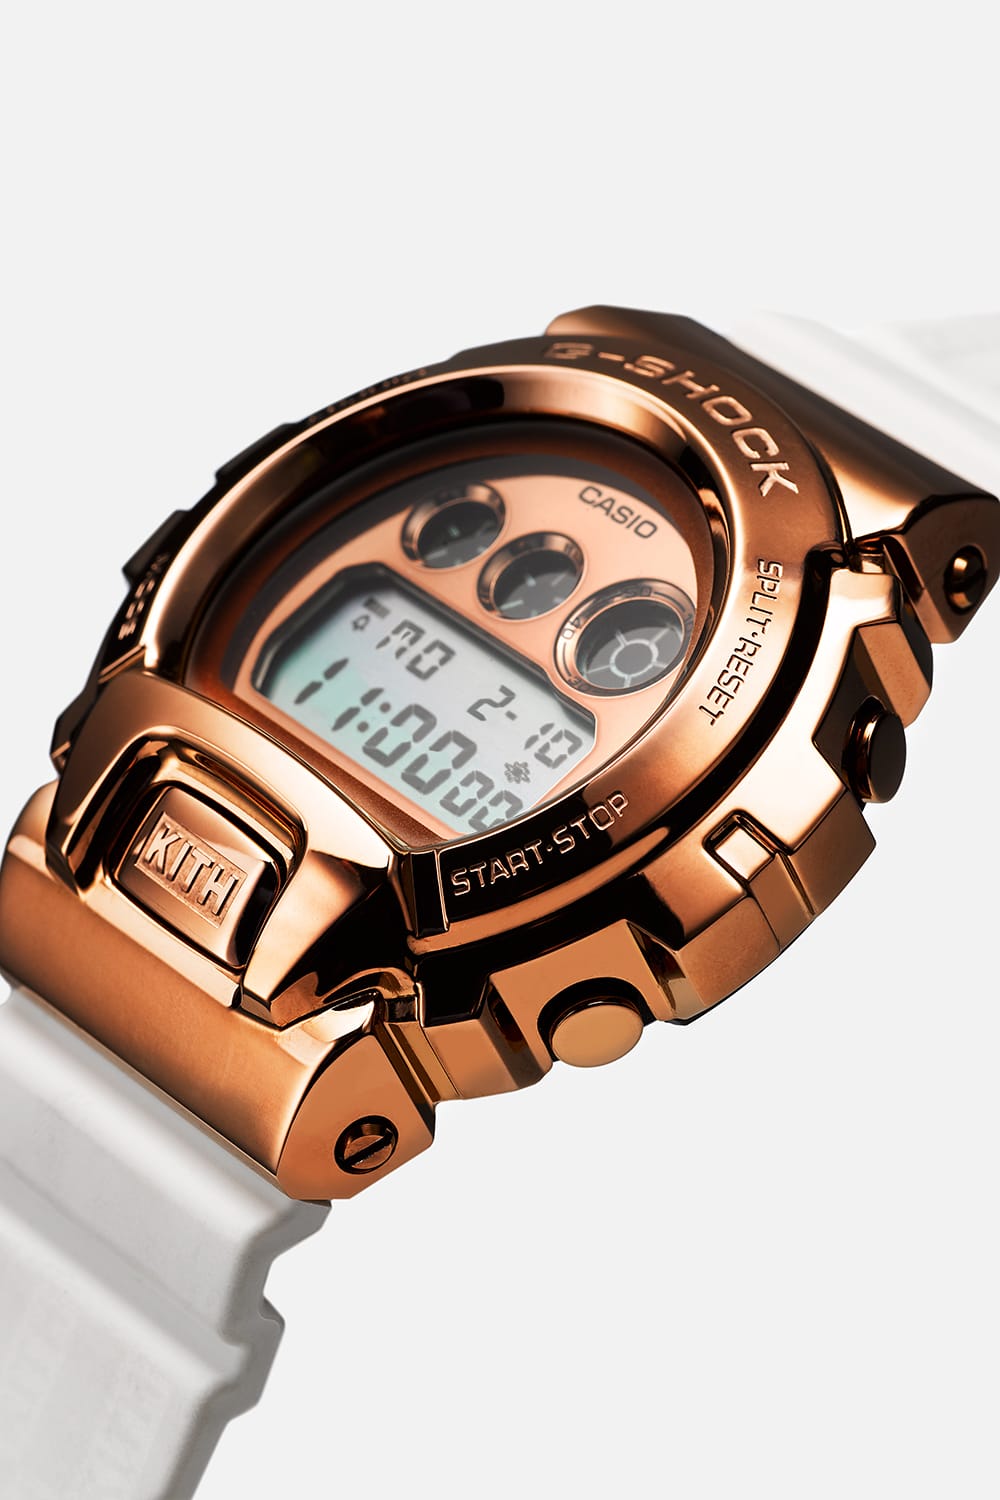 KITH and G-SHOCK Upgrade the GM-6900 Watch in Rose Gold | Hypebeast